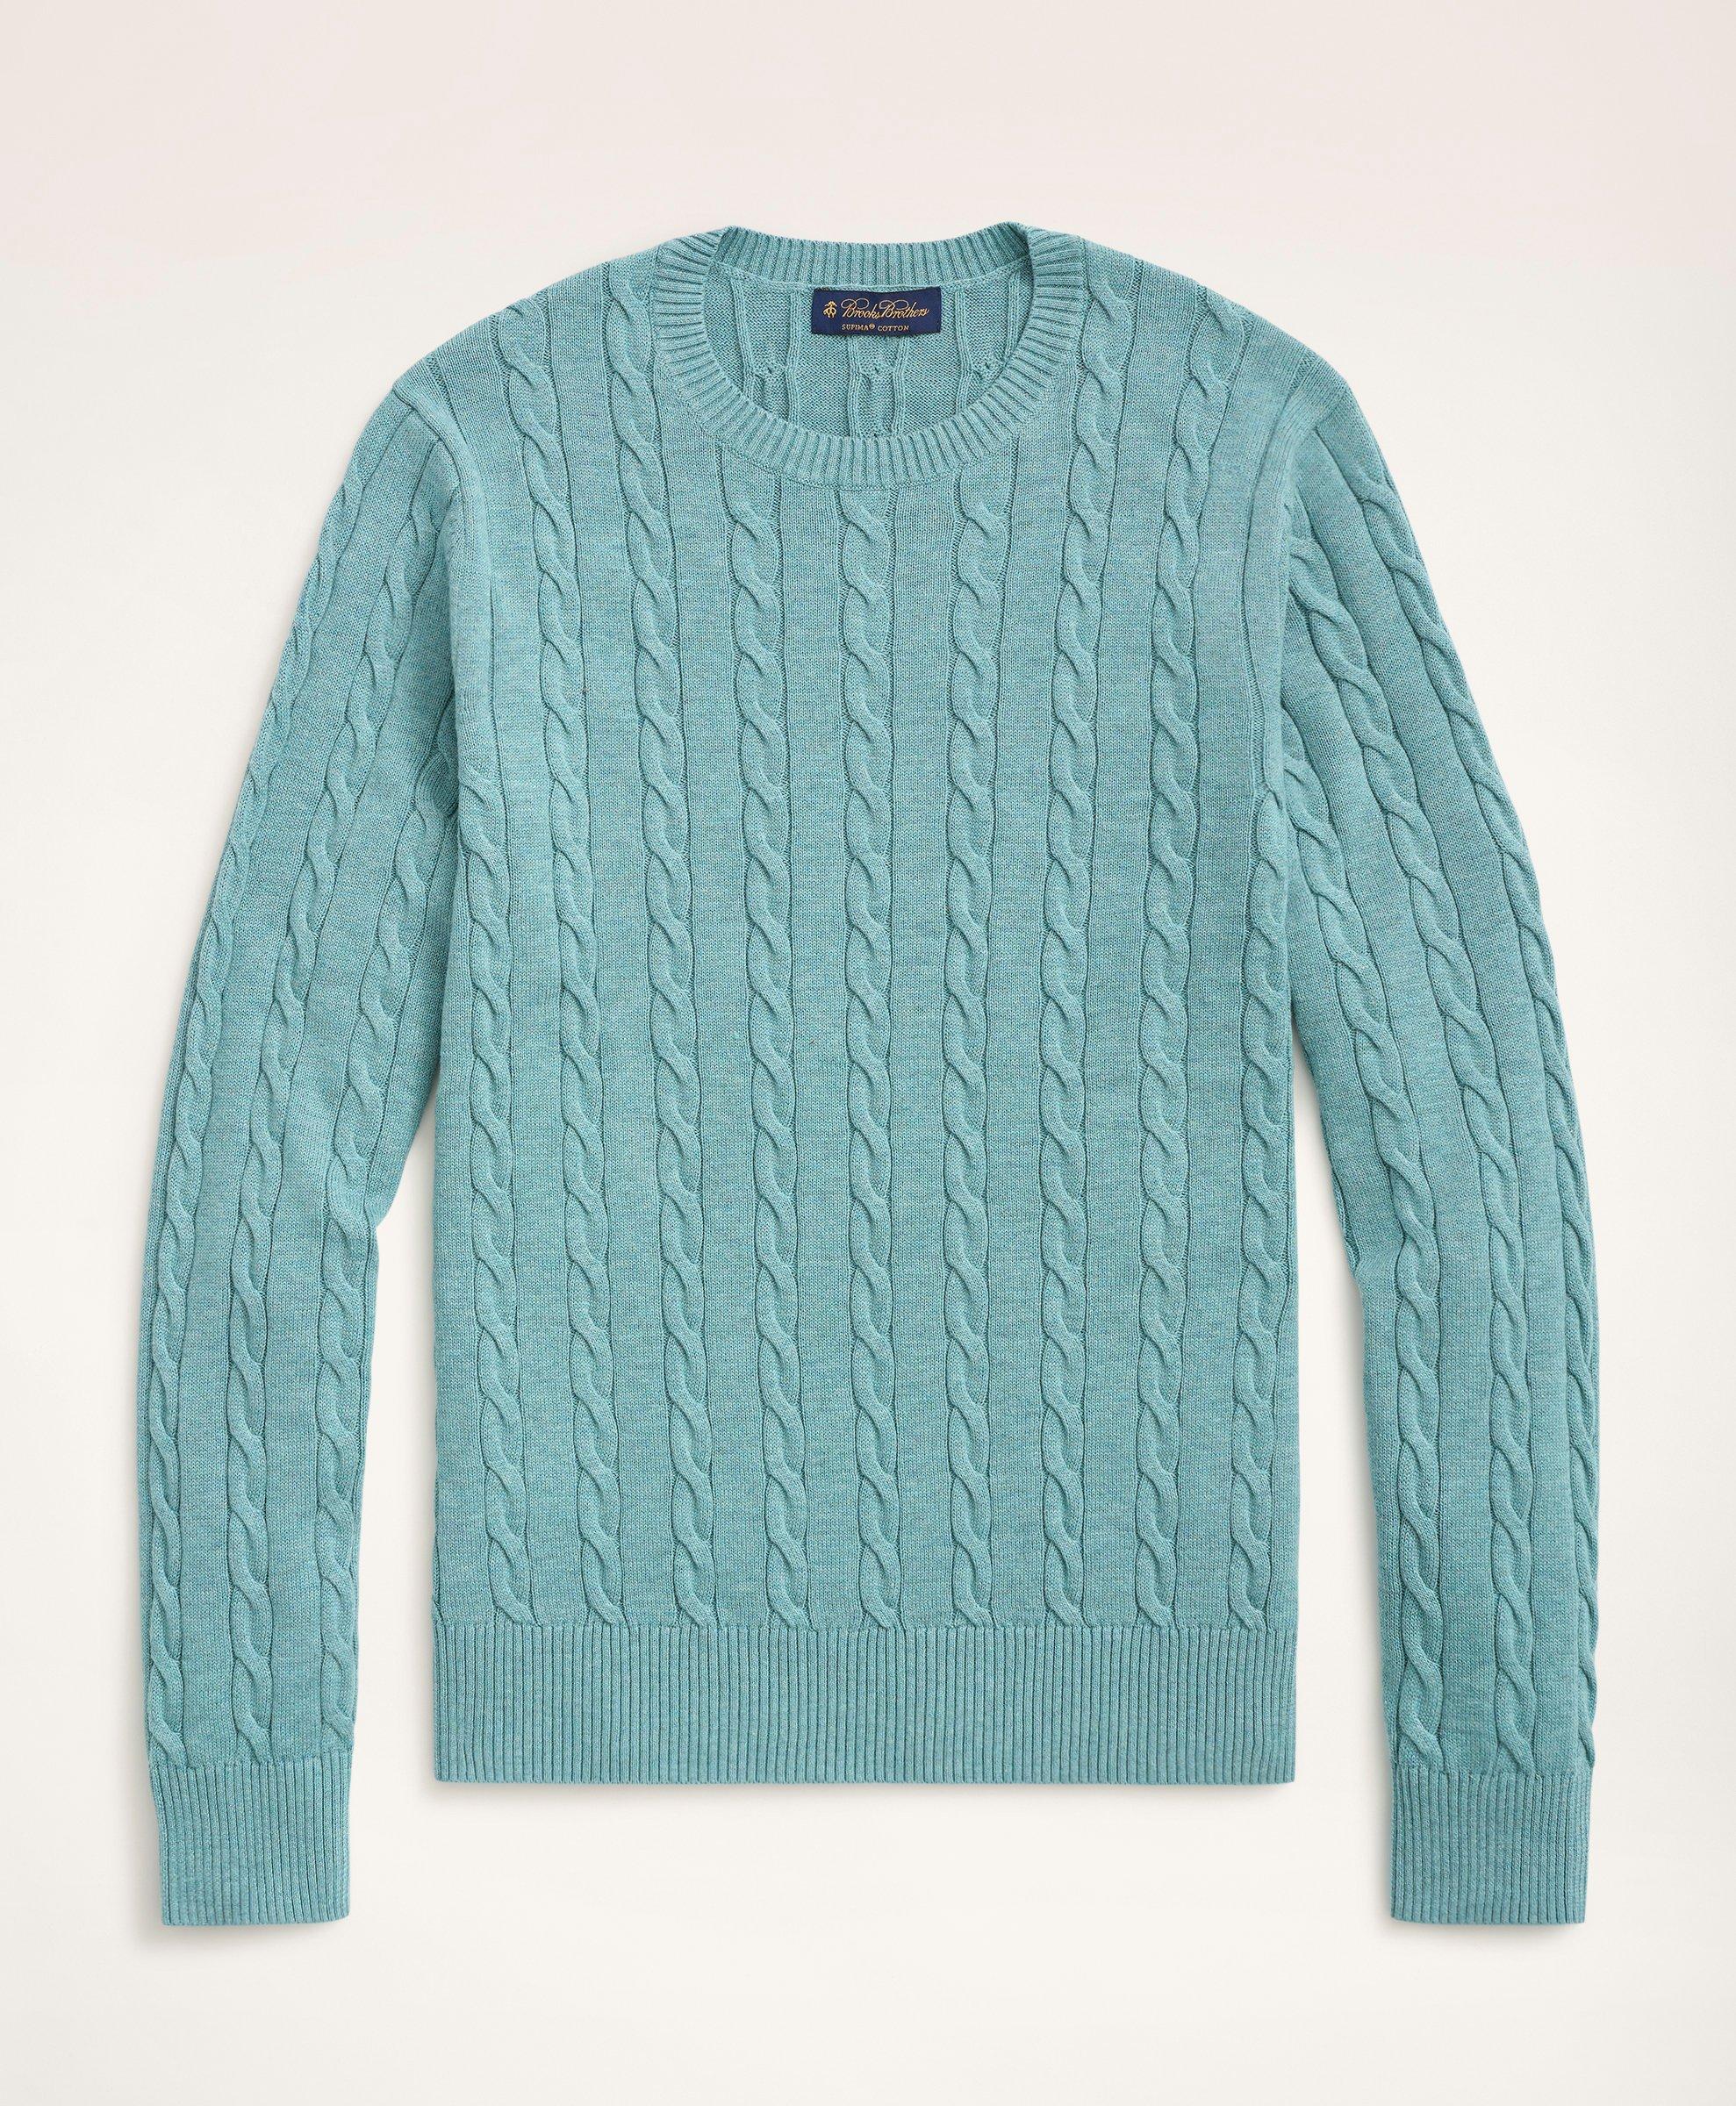 Brooks Brothers Big & Tall Supima Cotton Cable Crewneck Sweater | Turquoise | Size 2x Tall